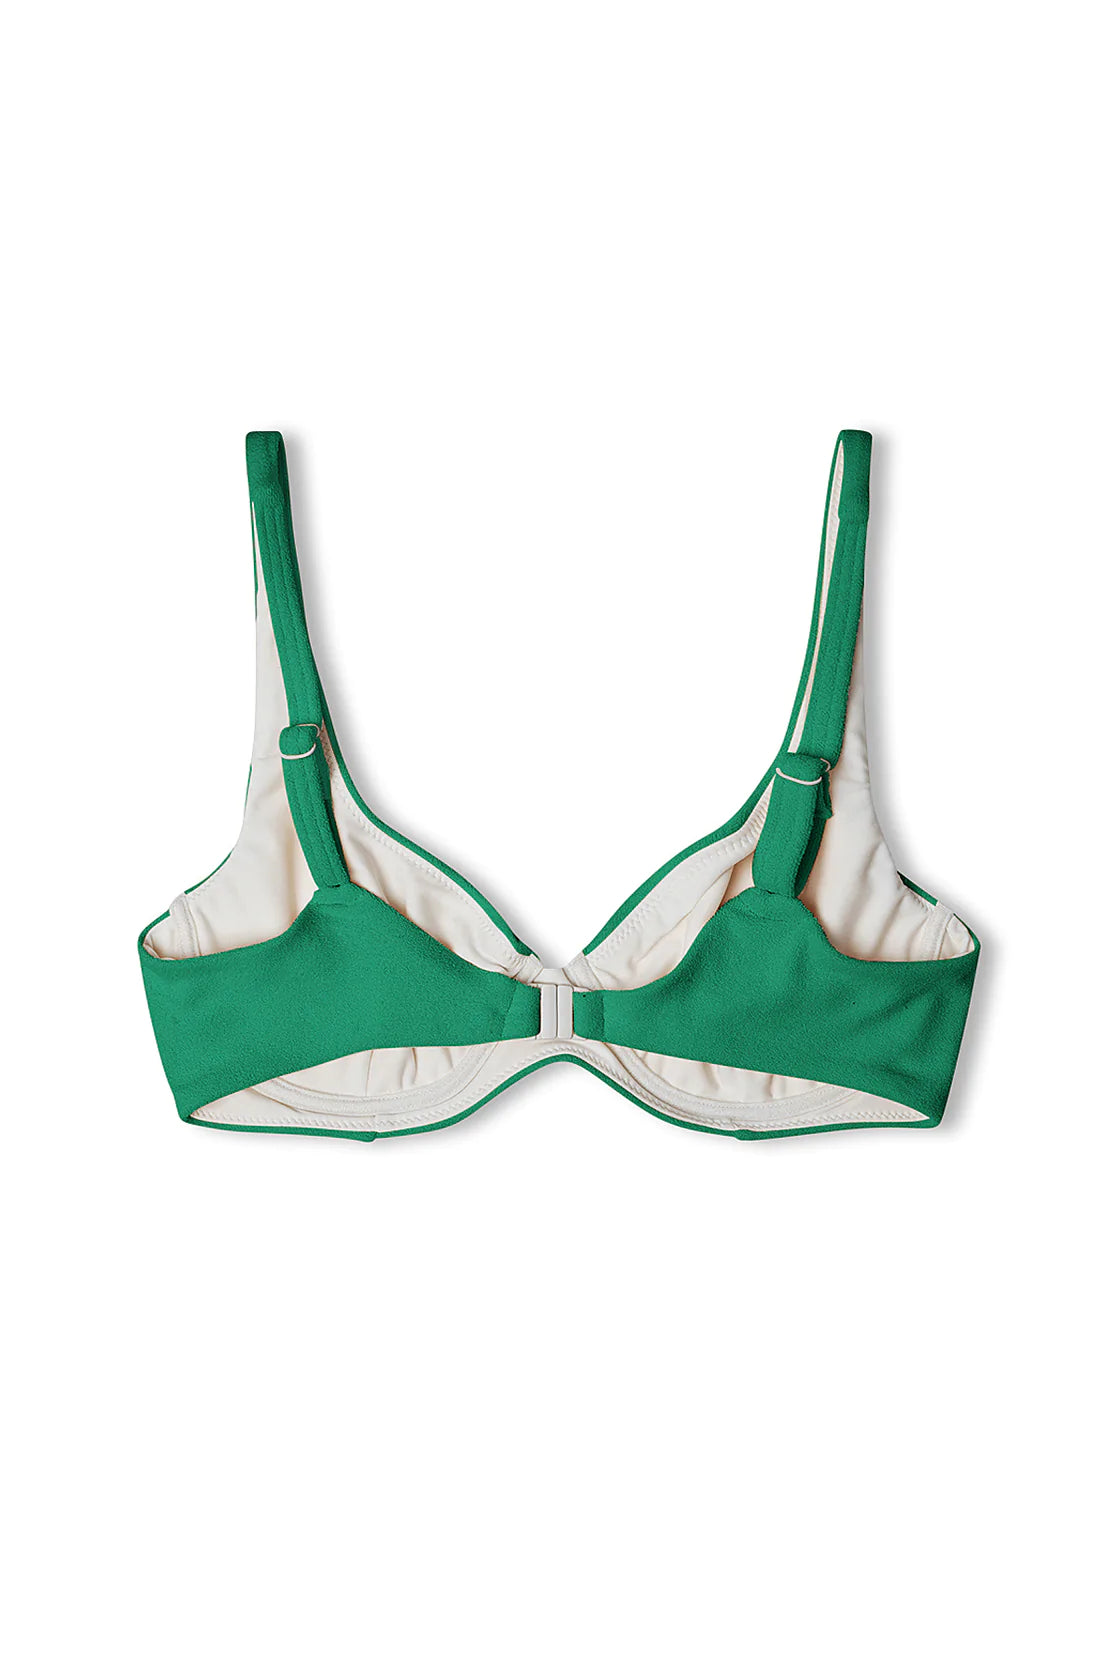 GREEN TOWELLING BRA CUP